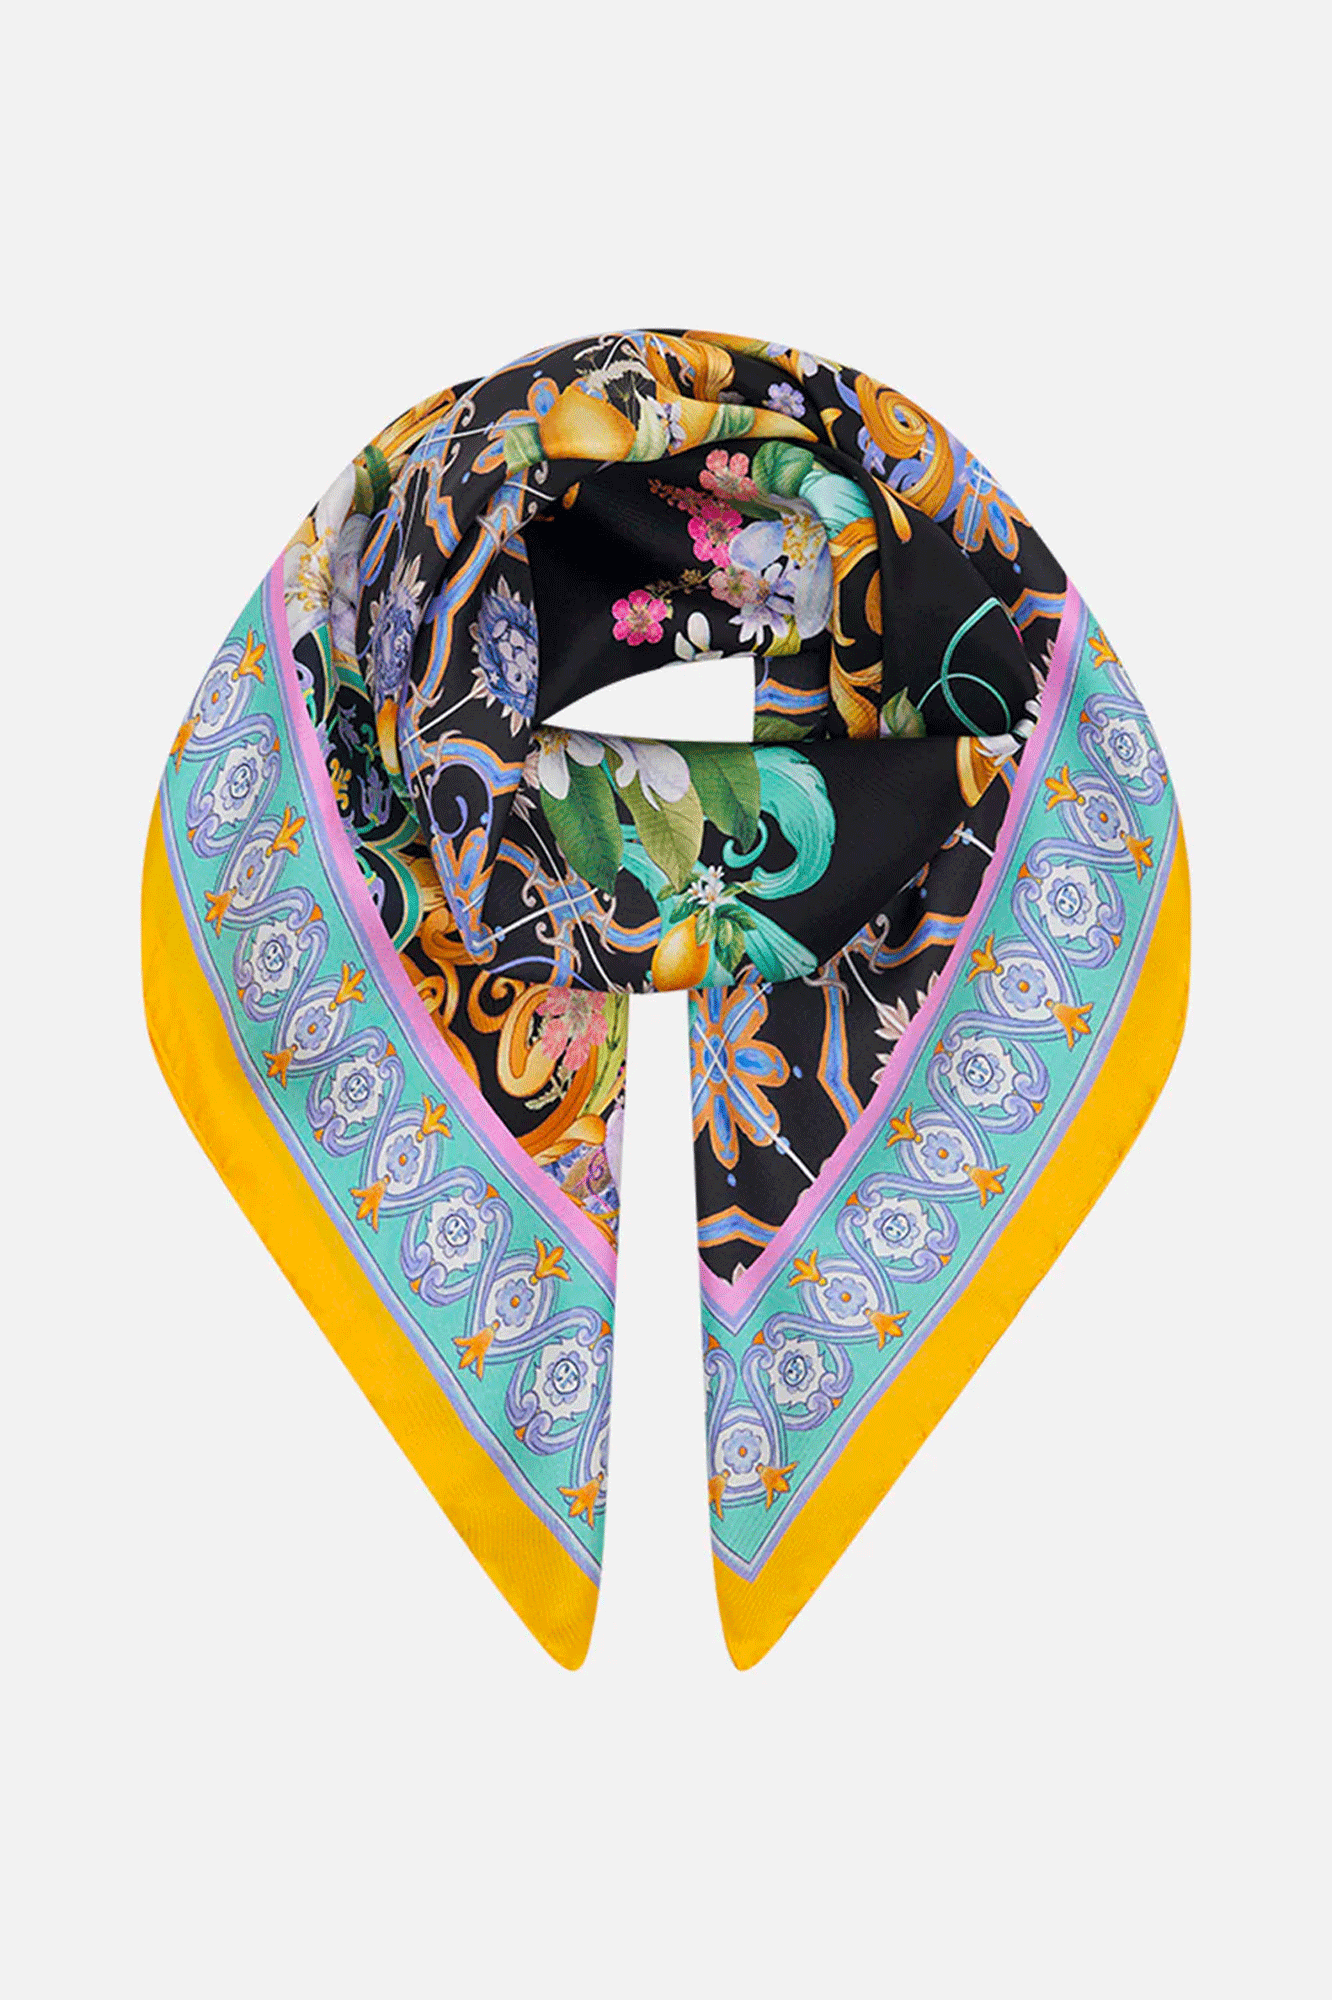 The Meet Me In Marchesa Silk Square Scarf from Camilla is perfect for a polished summer look.